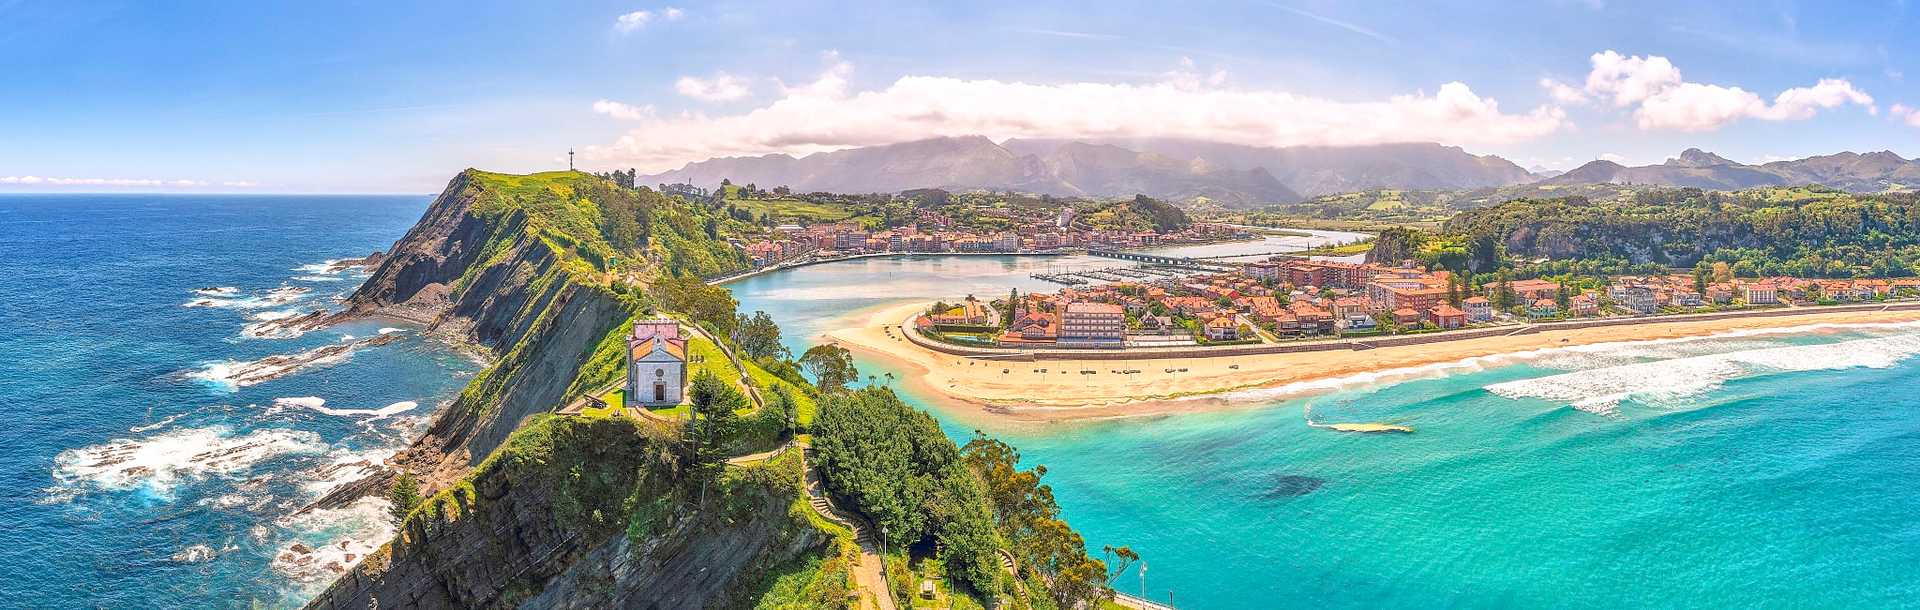 Aerial panorama of a church on top of the cliffs with views of the beach and mountains in Principality of Asturias, Spain.